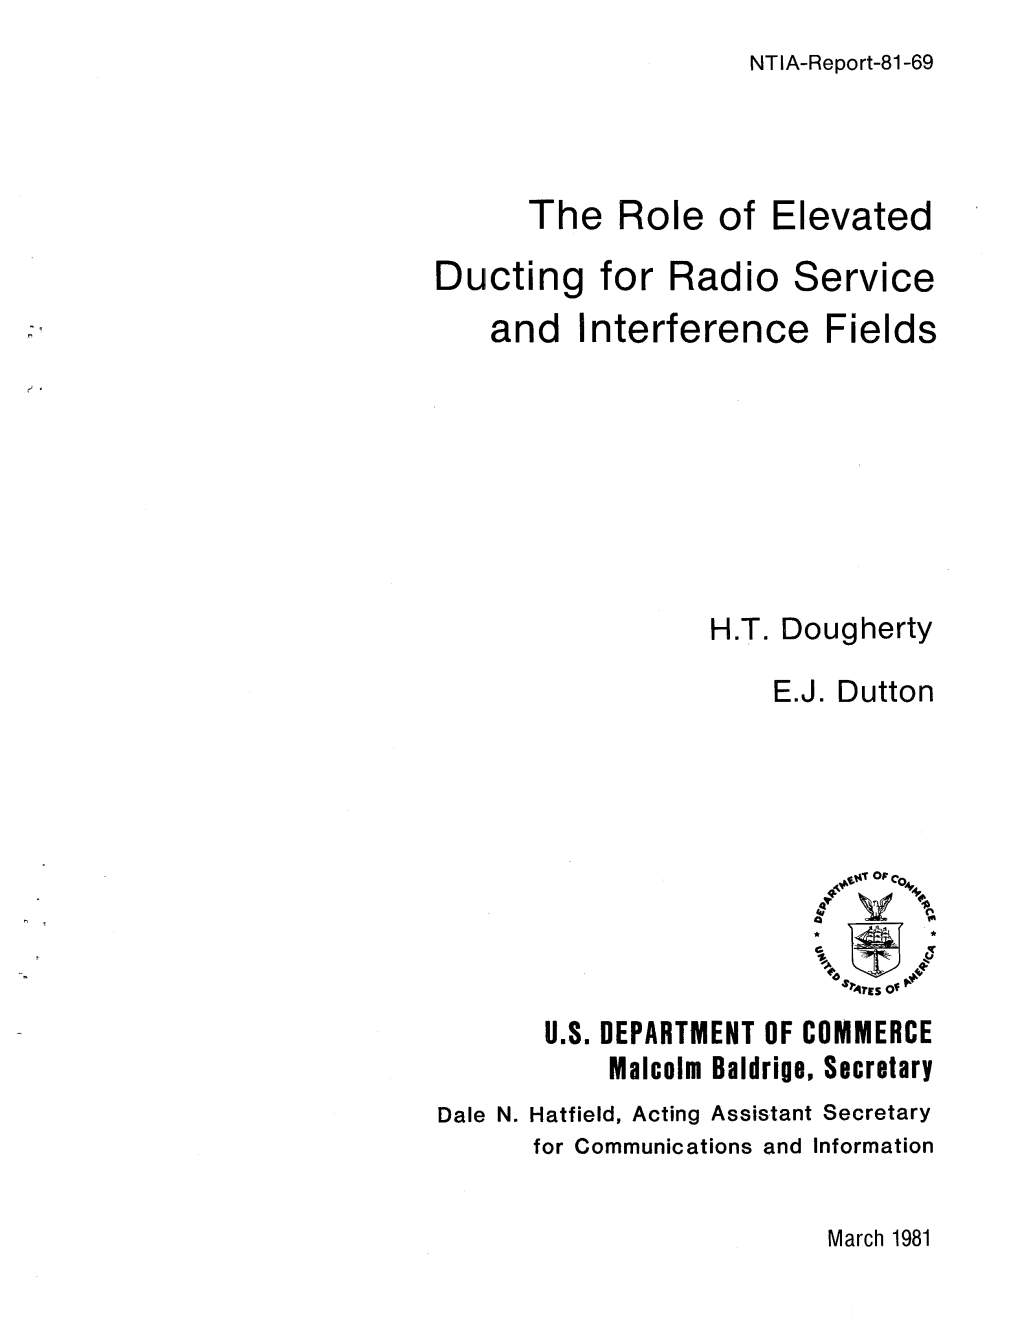 The Role of Elevated Ducting for Radio Service and Interference Fields H